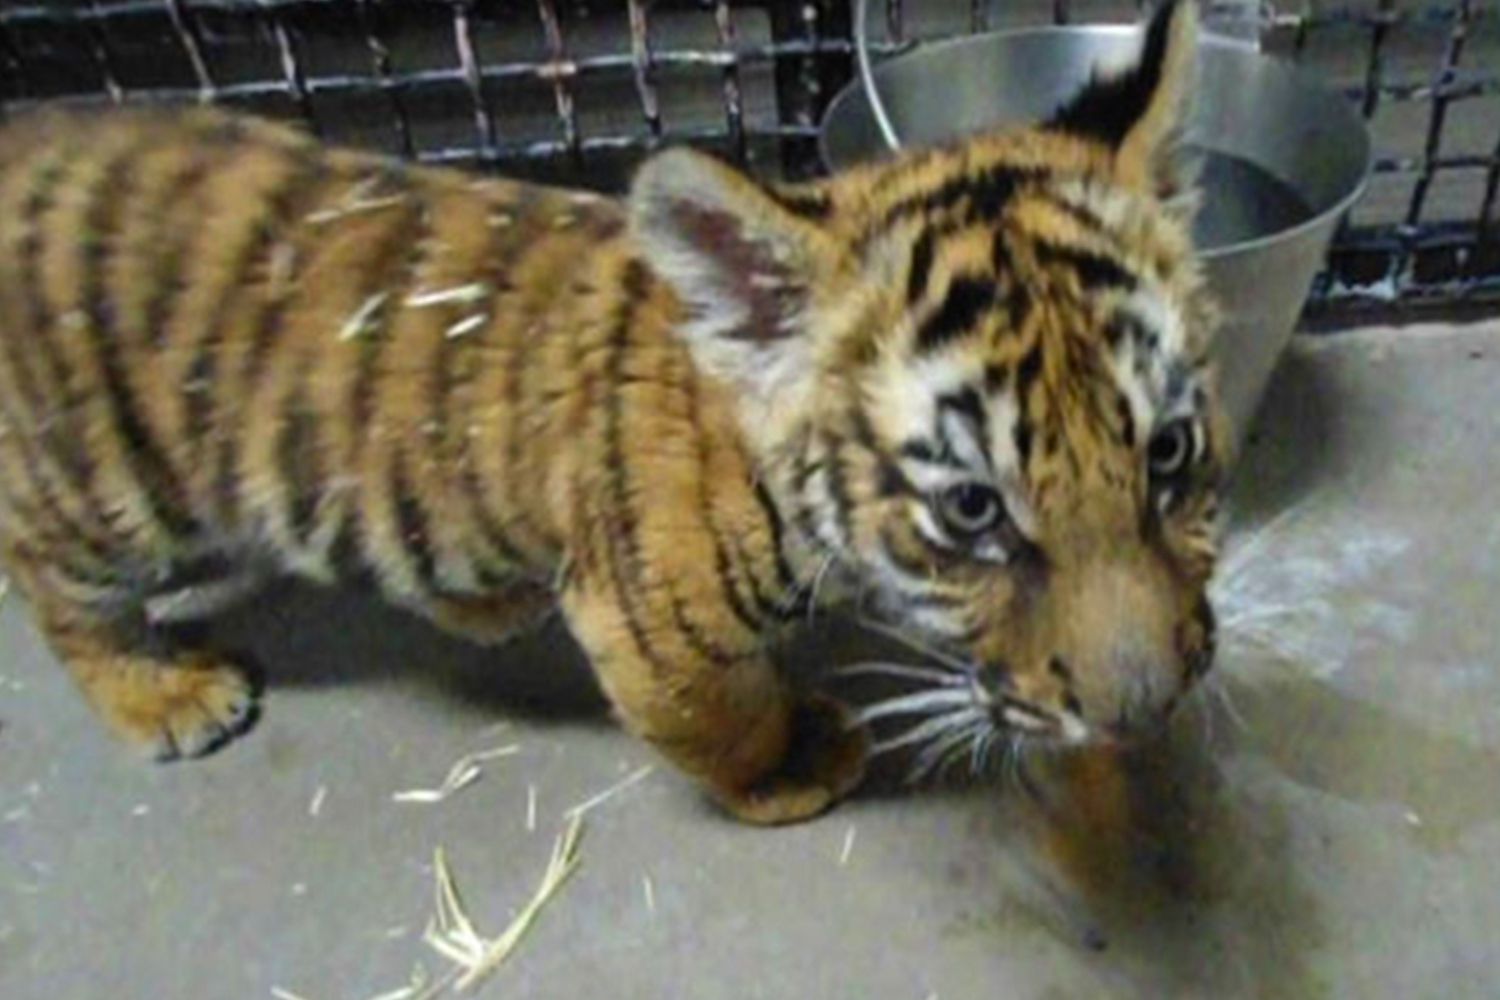 The tiger cub will remain at the ABQ BioPark, a zoo in Albuquerque until it finds a permanent home